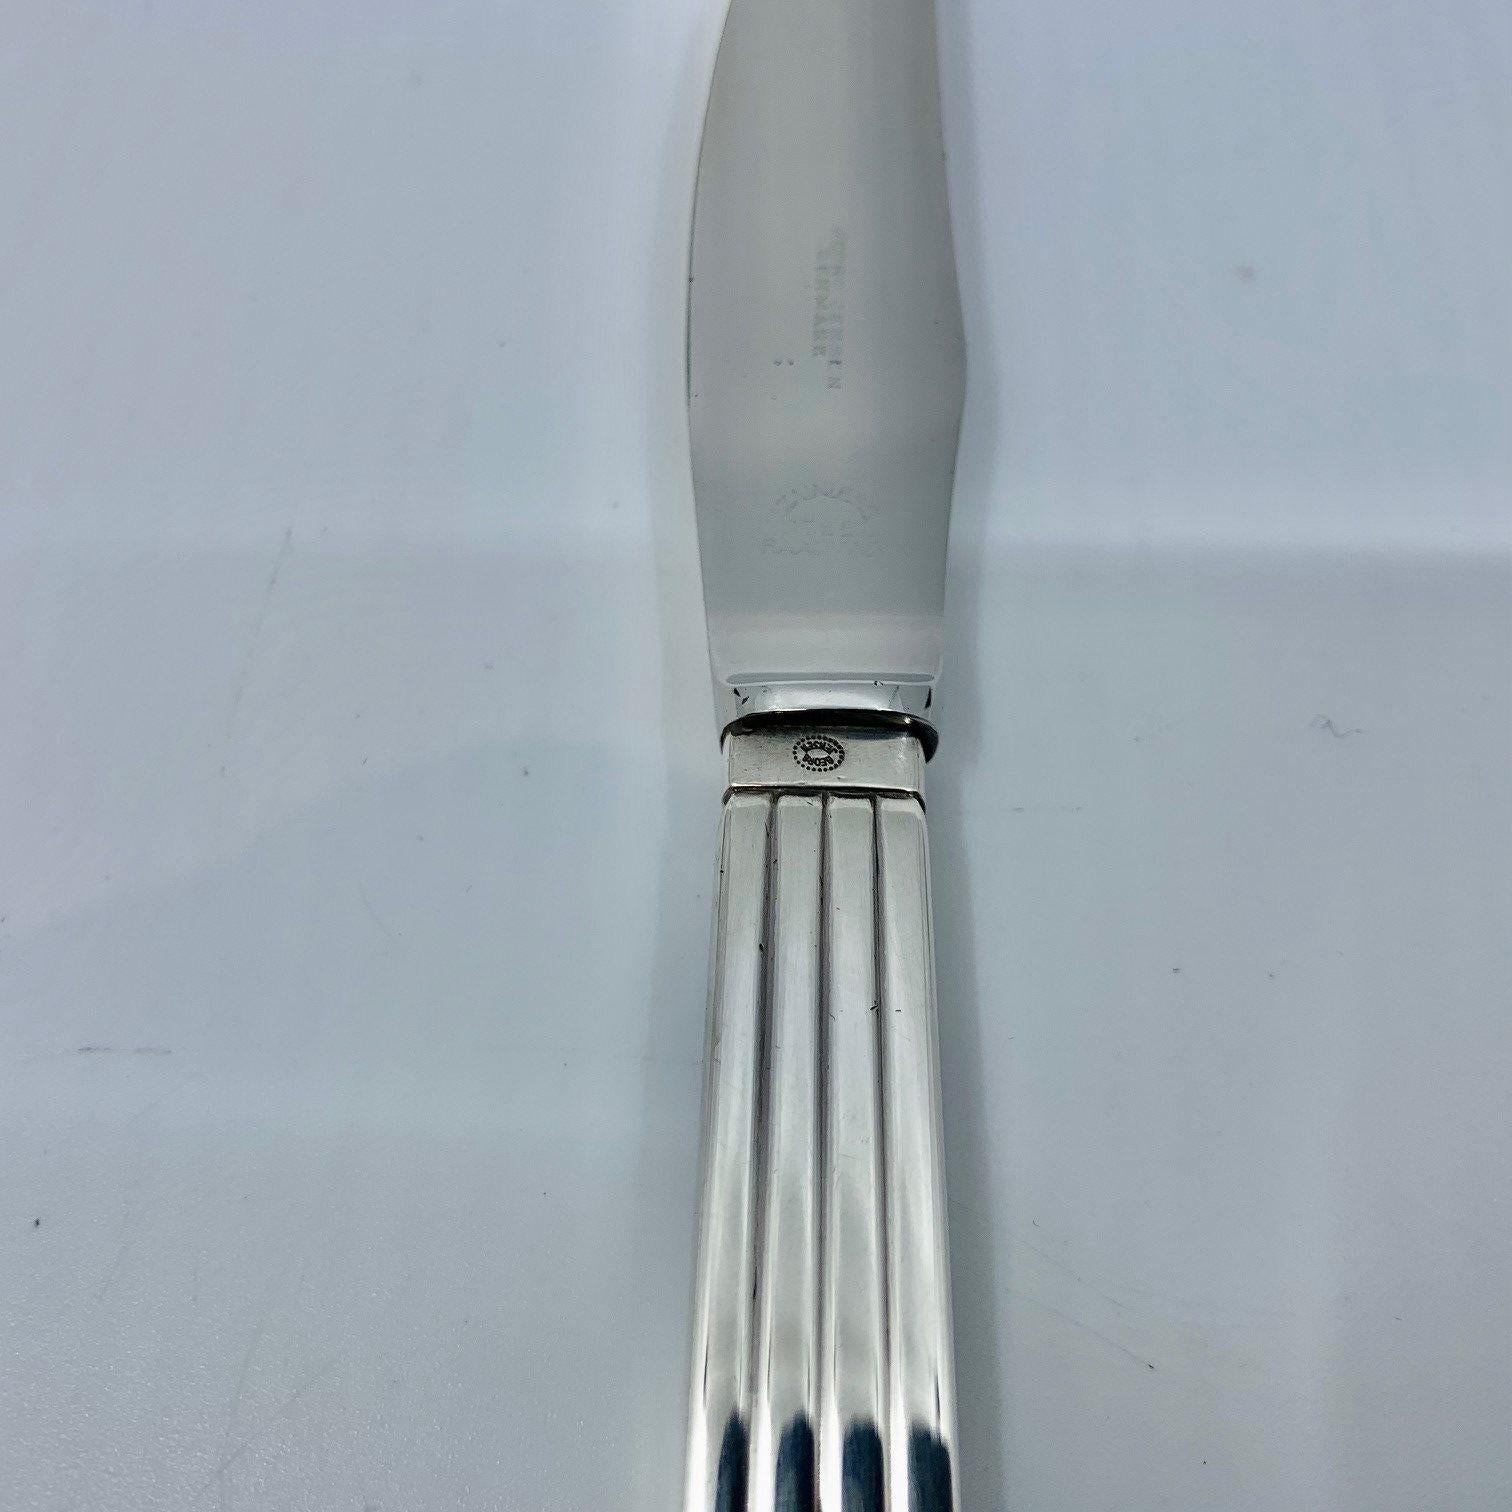 This is a Georg Jensen sterling silver luncheon/salad knife (stainless steel blade), item 024 in the Bernadotte pattern, design #9 by Sigvard Bernadotte from 1939.

Additional information:
Material: Sterling silver, stainless steel
Styles: Art